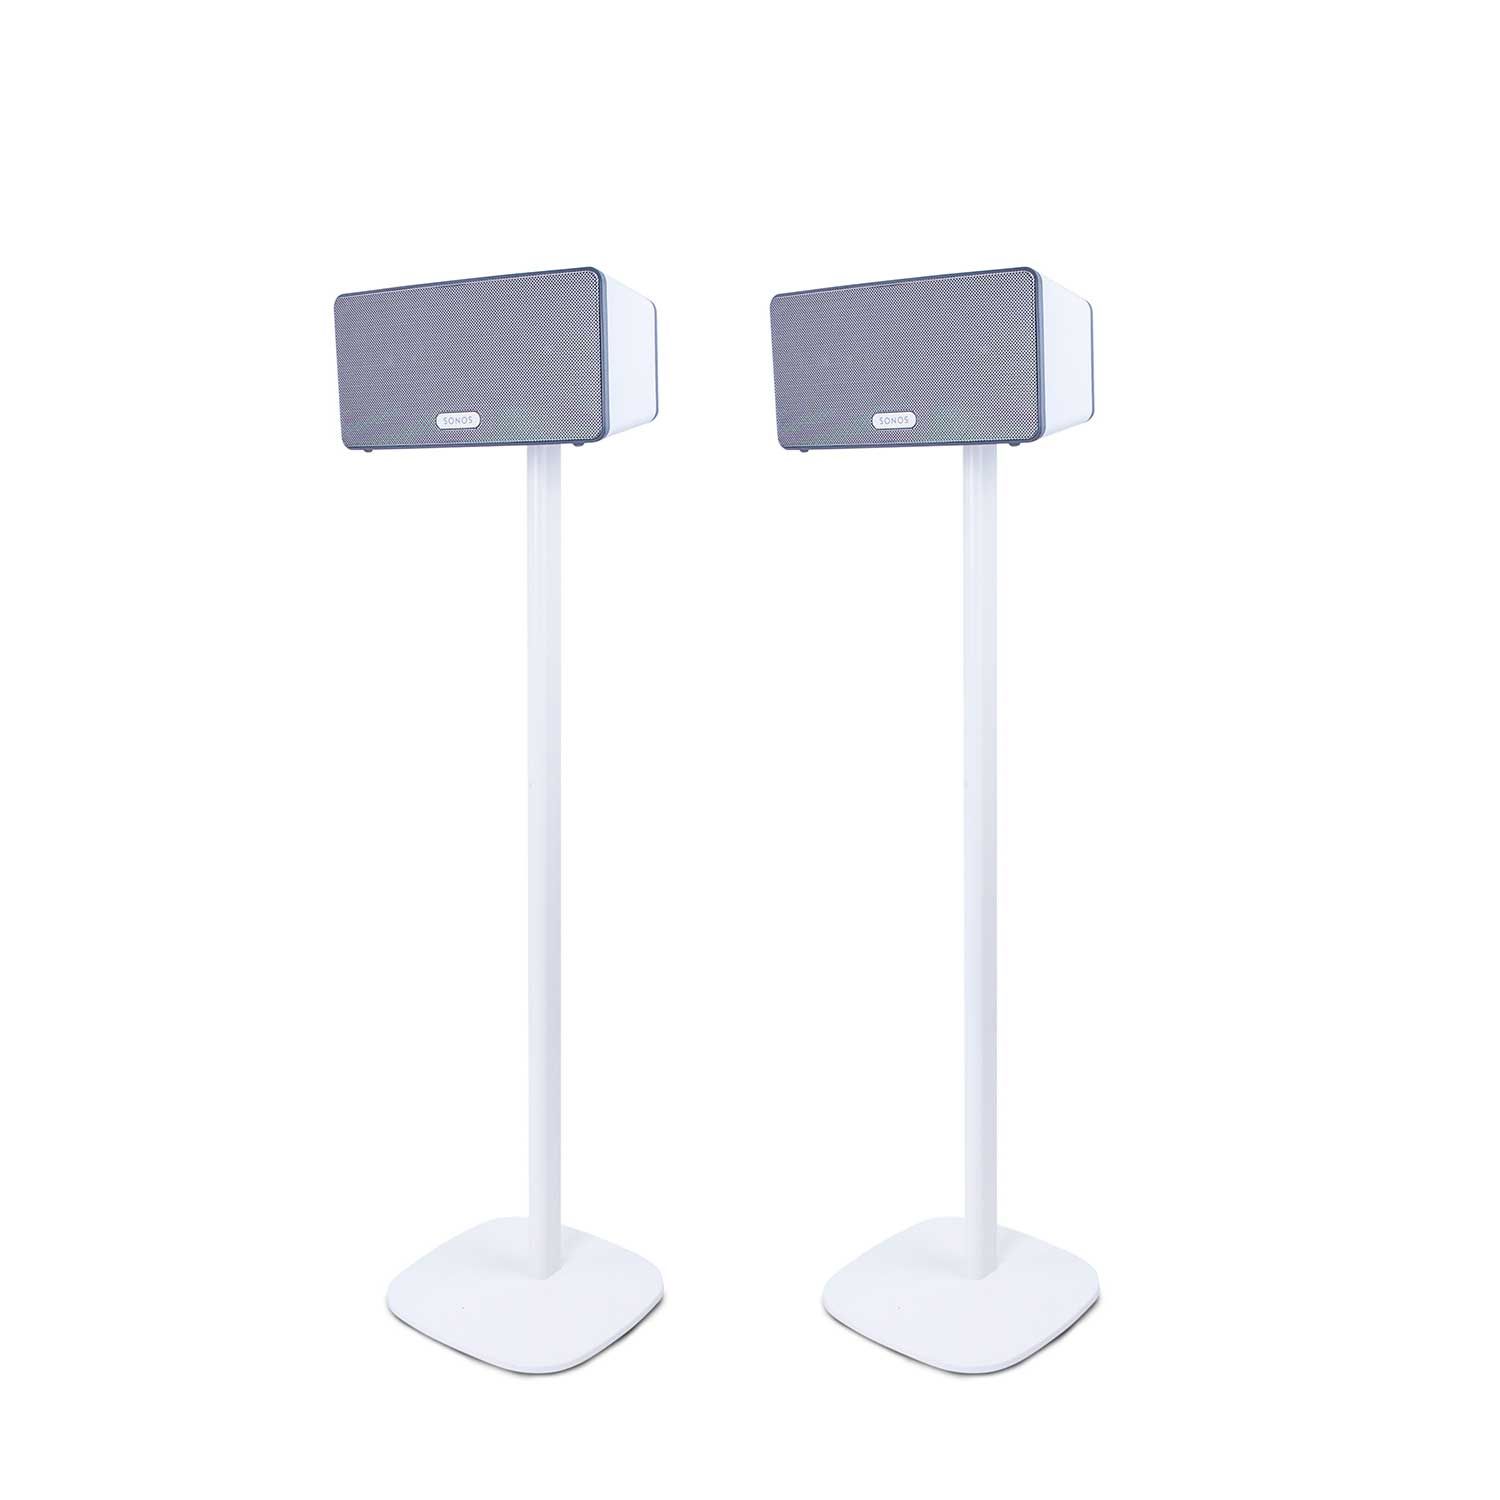 Vebos floor stand Sonos Play 3 white set The floor stand for Sonos Play:3